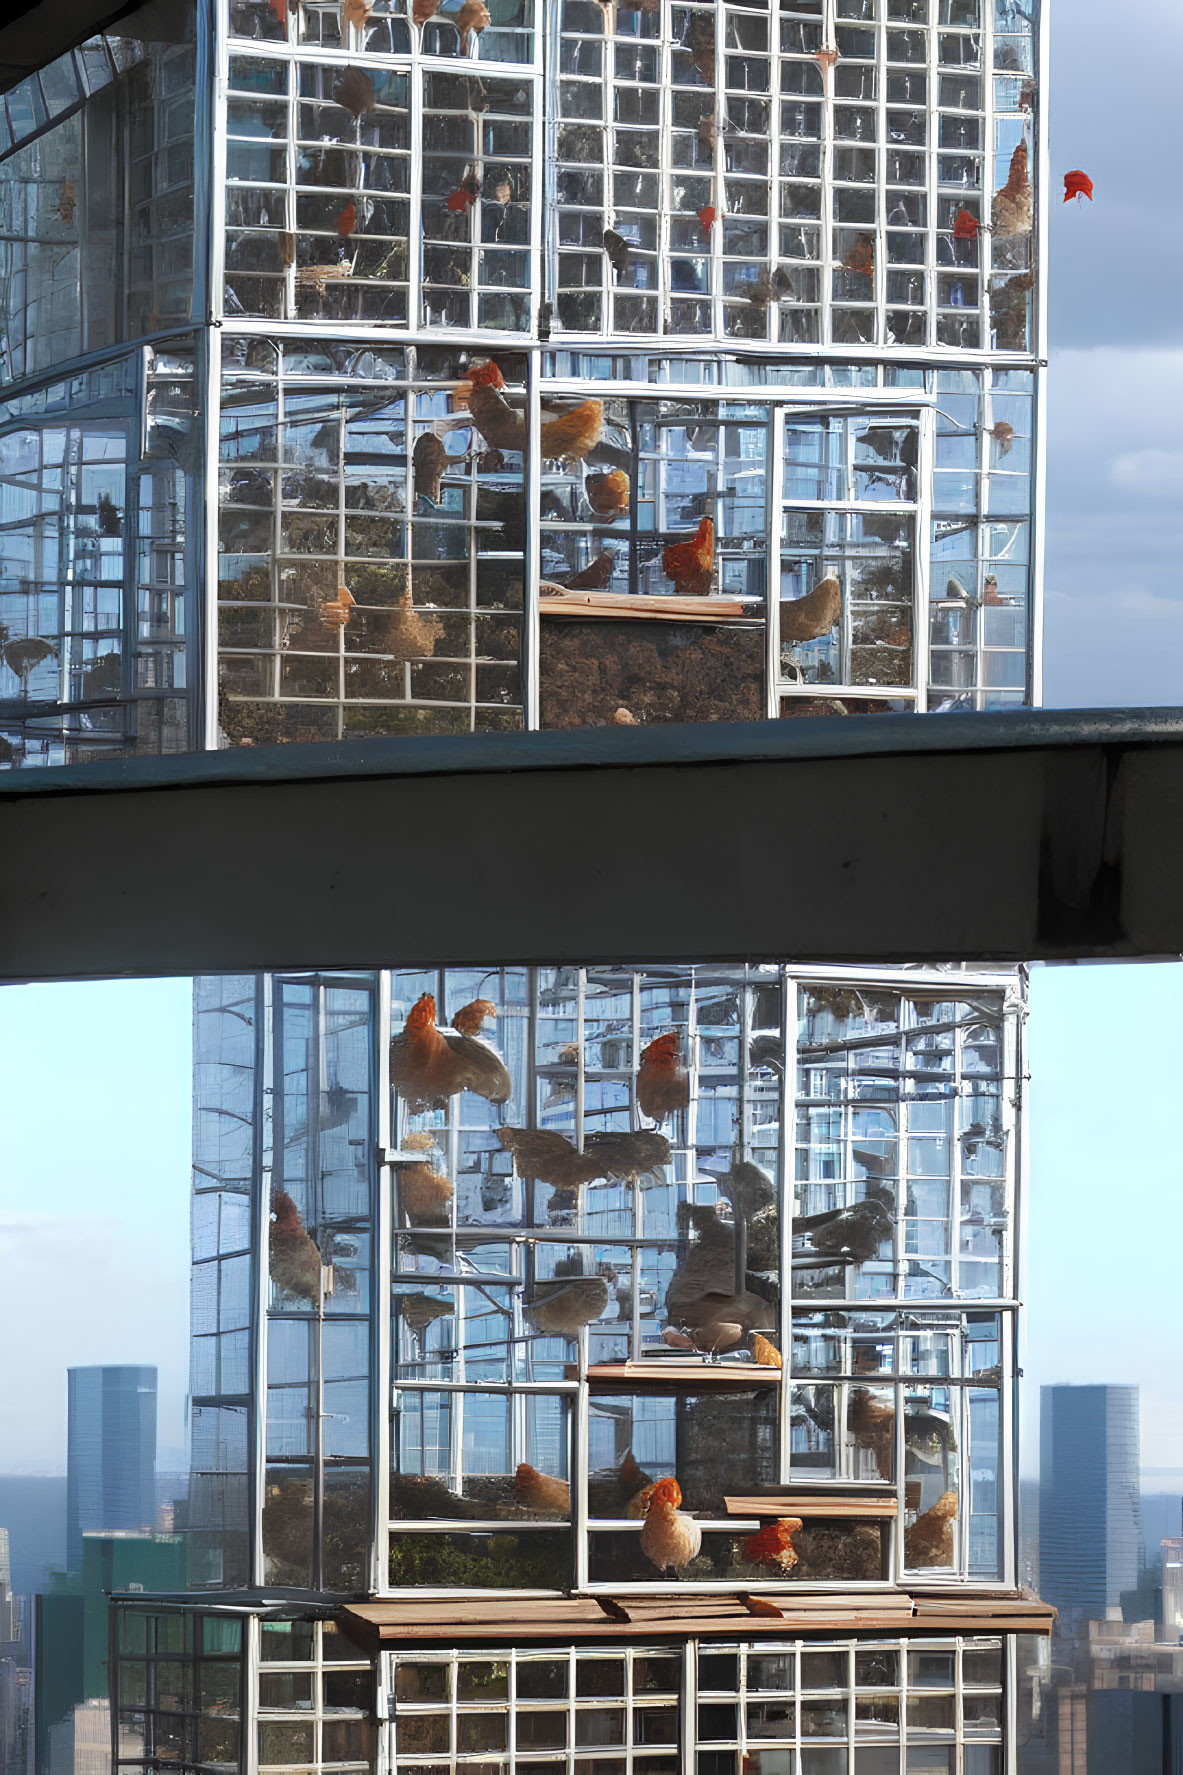 Urban hens on glass facade: daylight to dusk transition